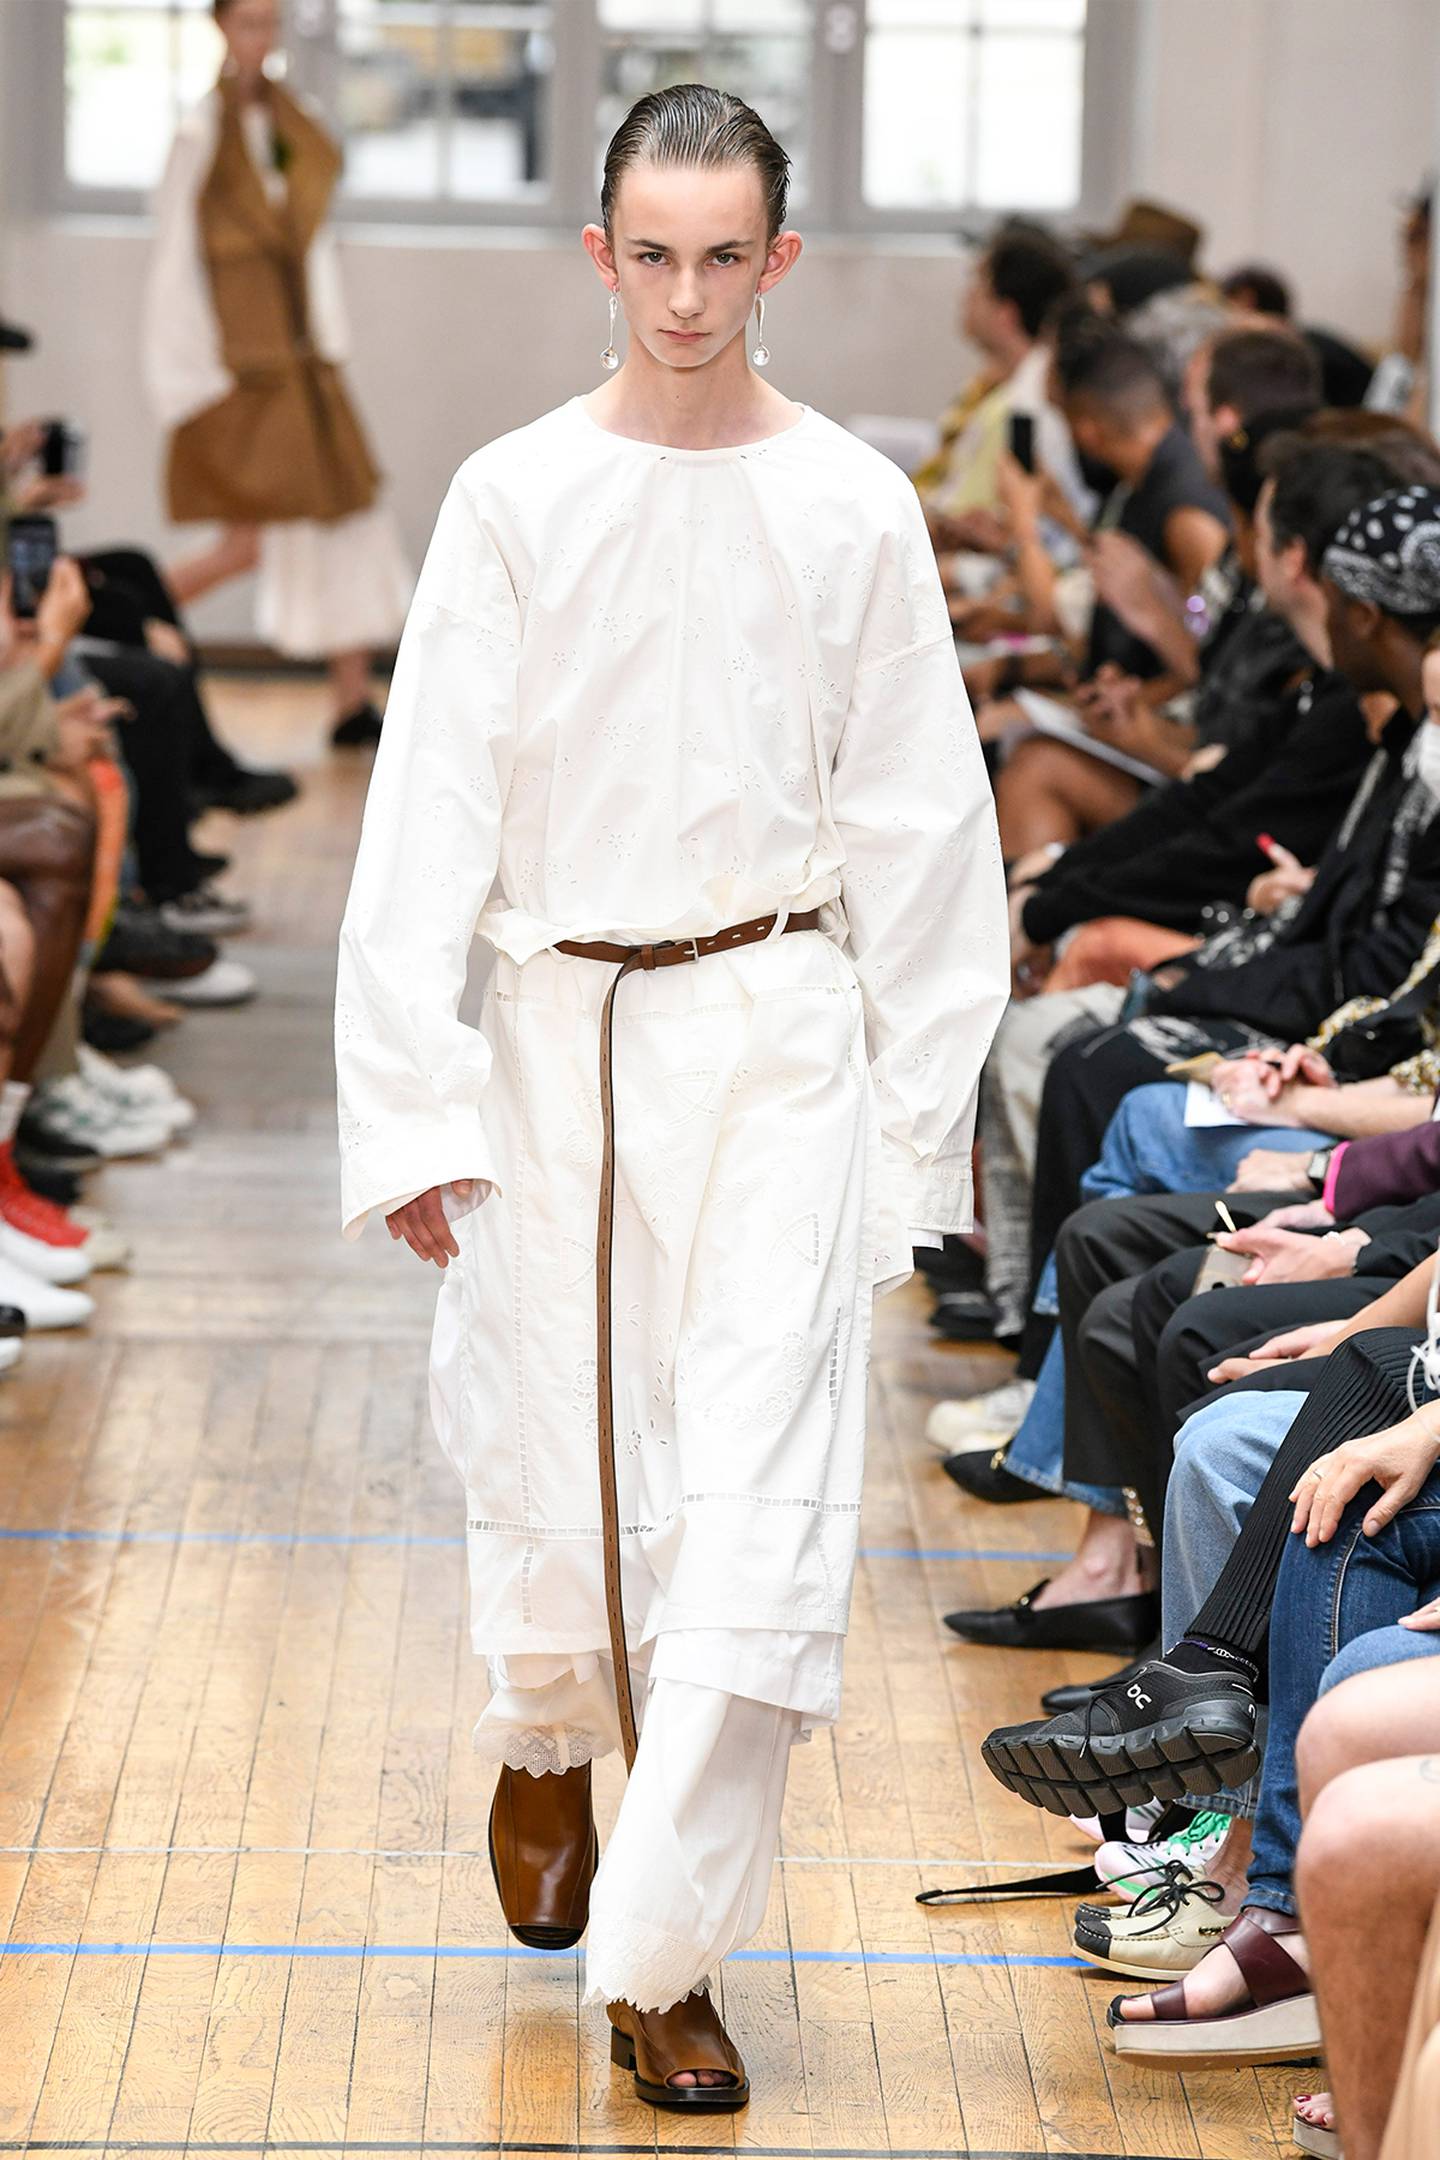 A model wears a relaxed fit white outfit with a long shirt and brown long belt and shoes.